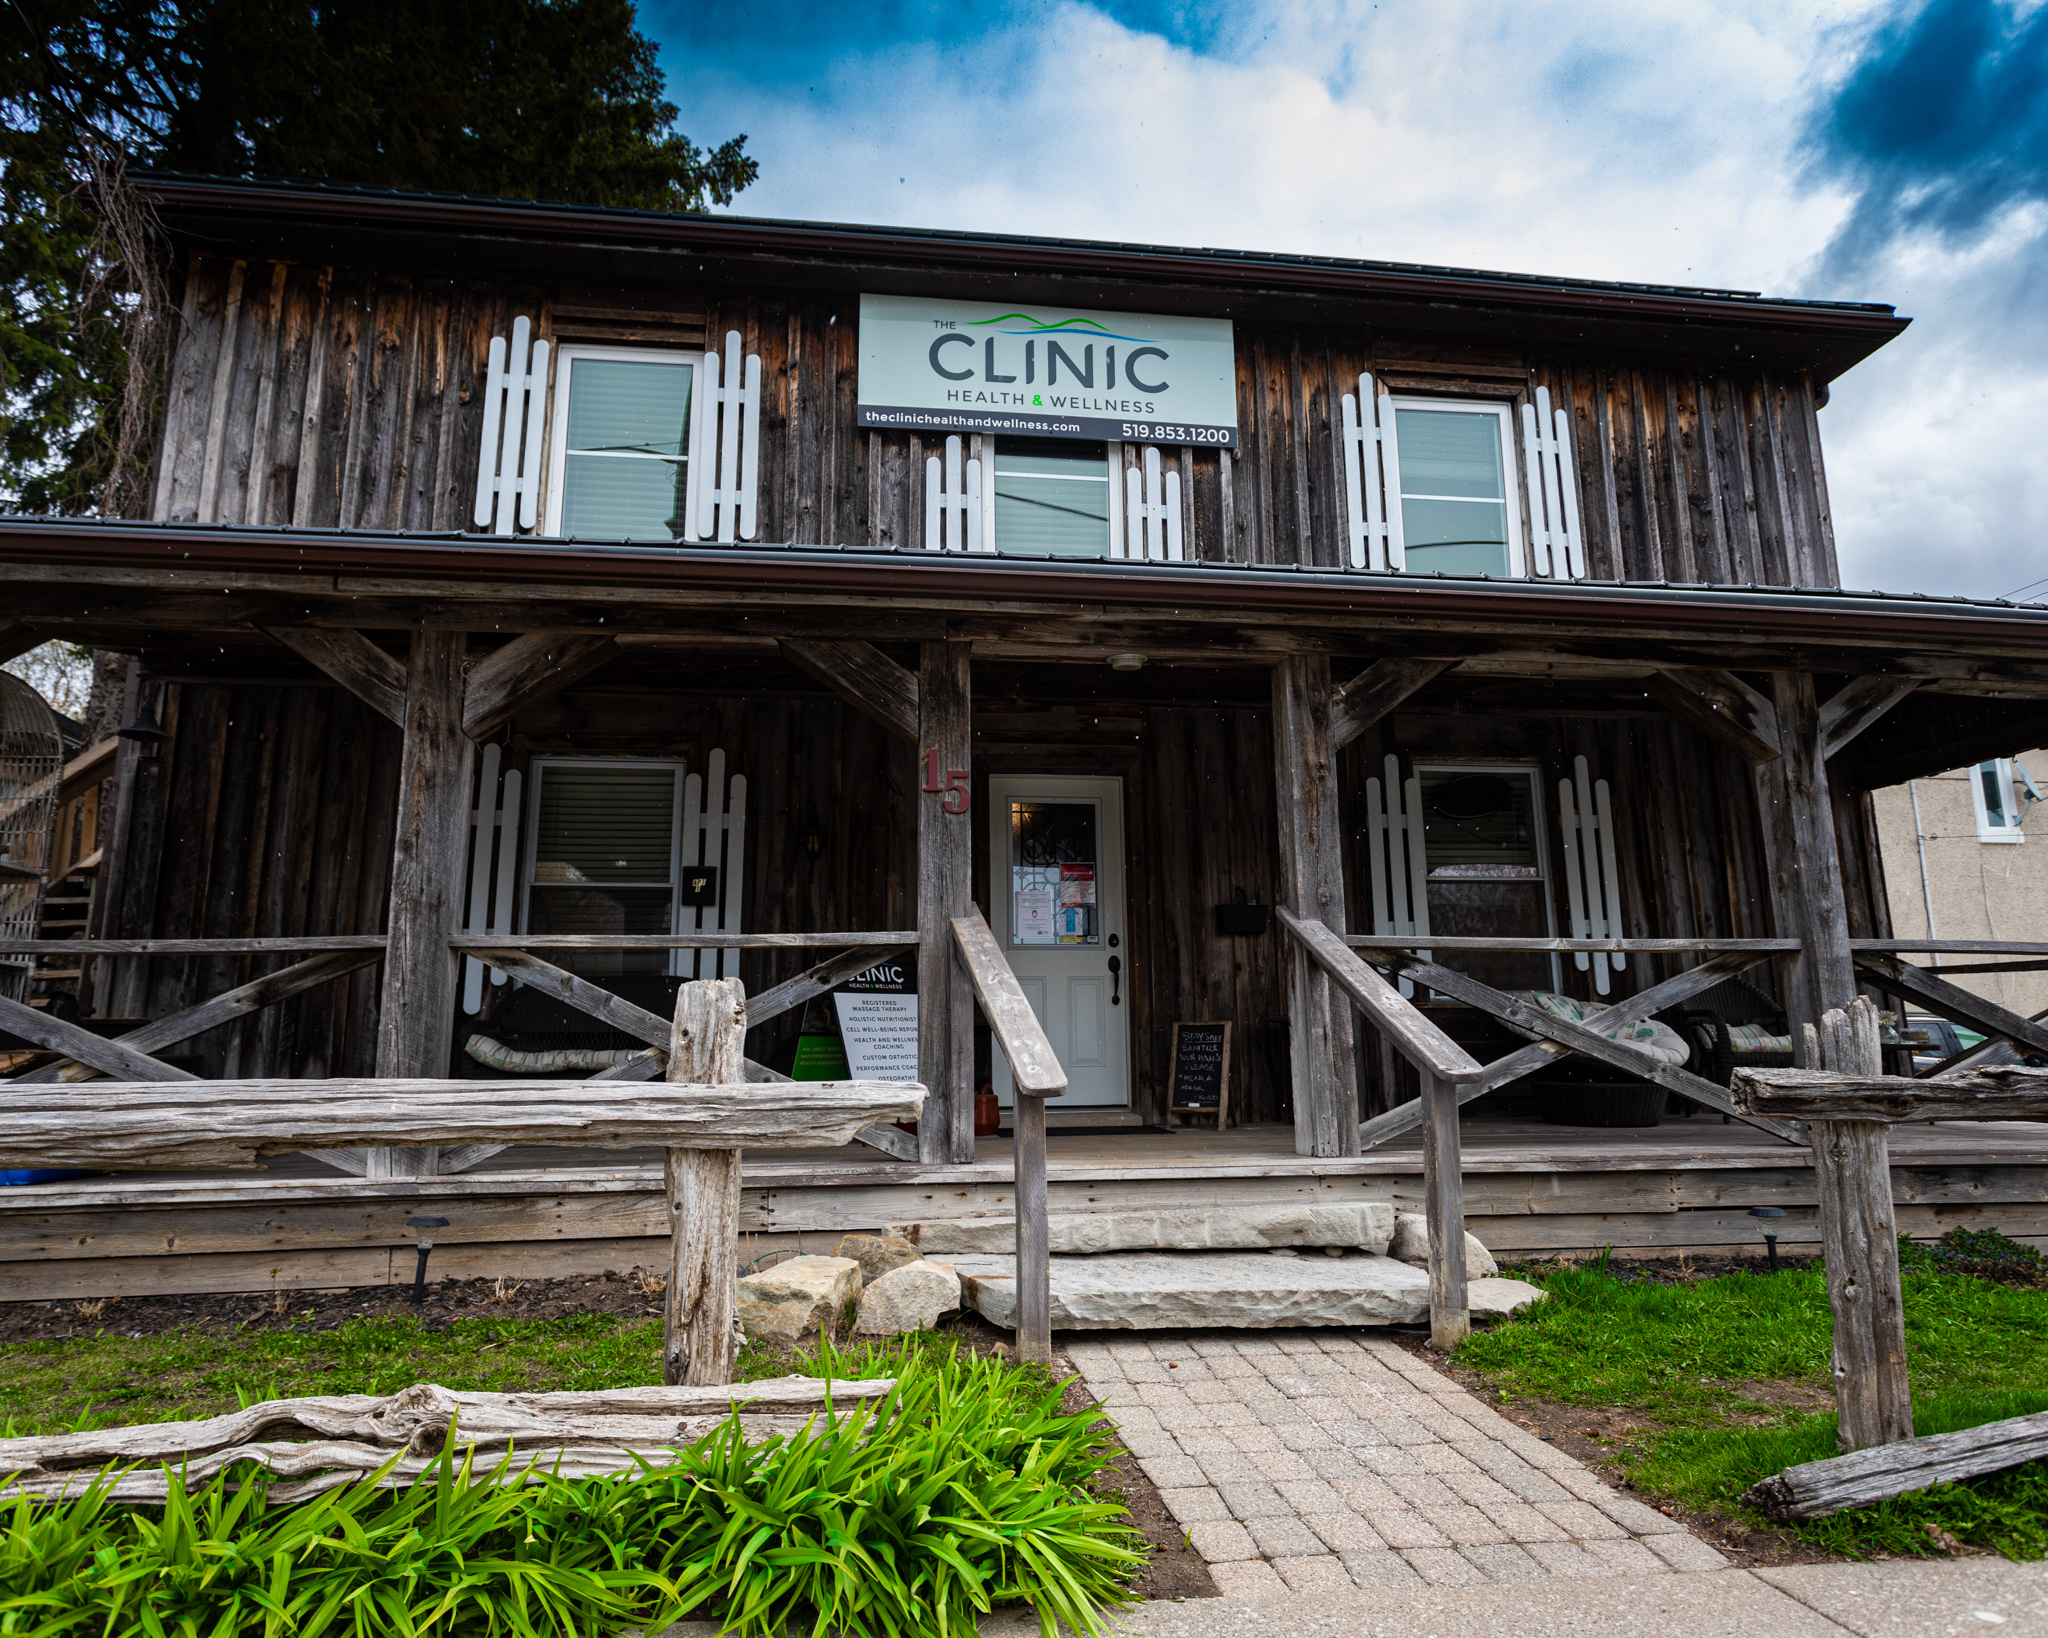 The Clinic Health and Wellness